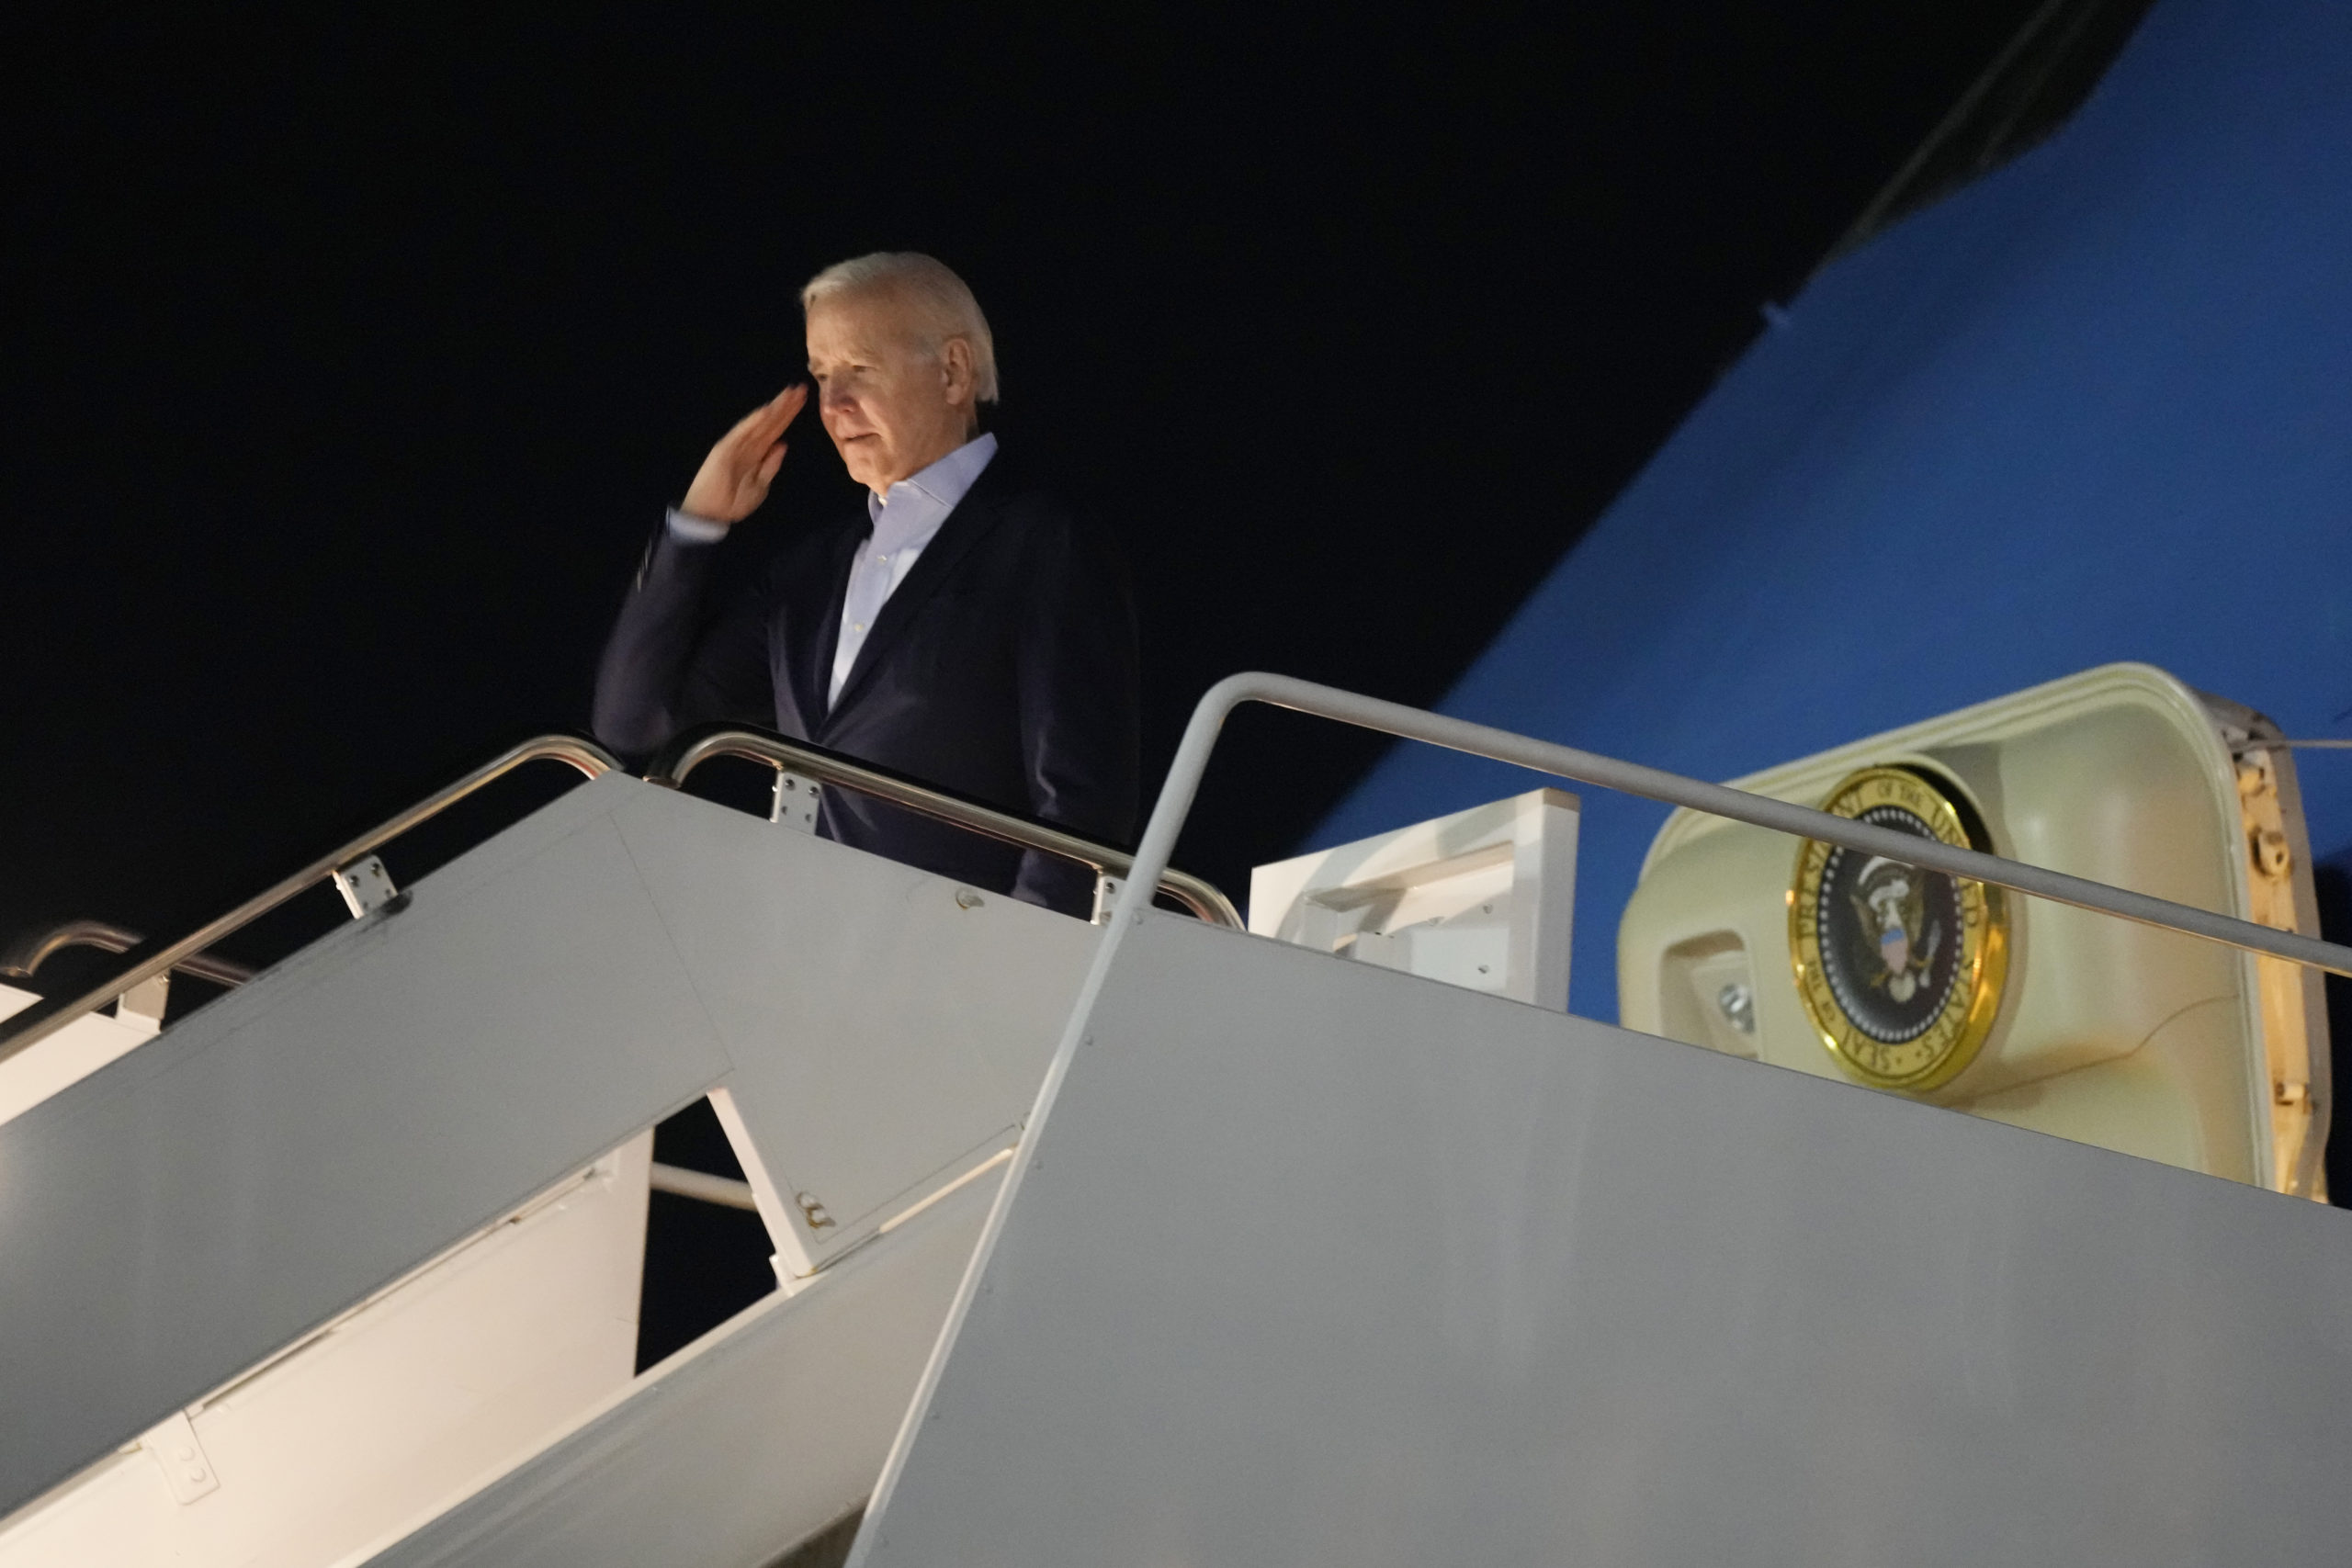 President Joe Biden salutes as he boards Air Force One at Andrews Air Force Base, Maryland, Tuesday. Biden and his family were traveling to St. Croix, U.S. Virgin Islands, to celebrate New Year.